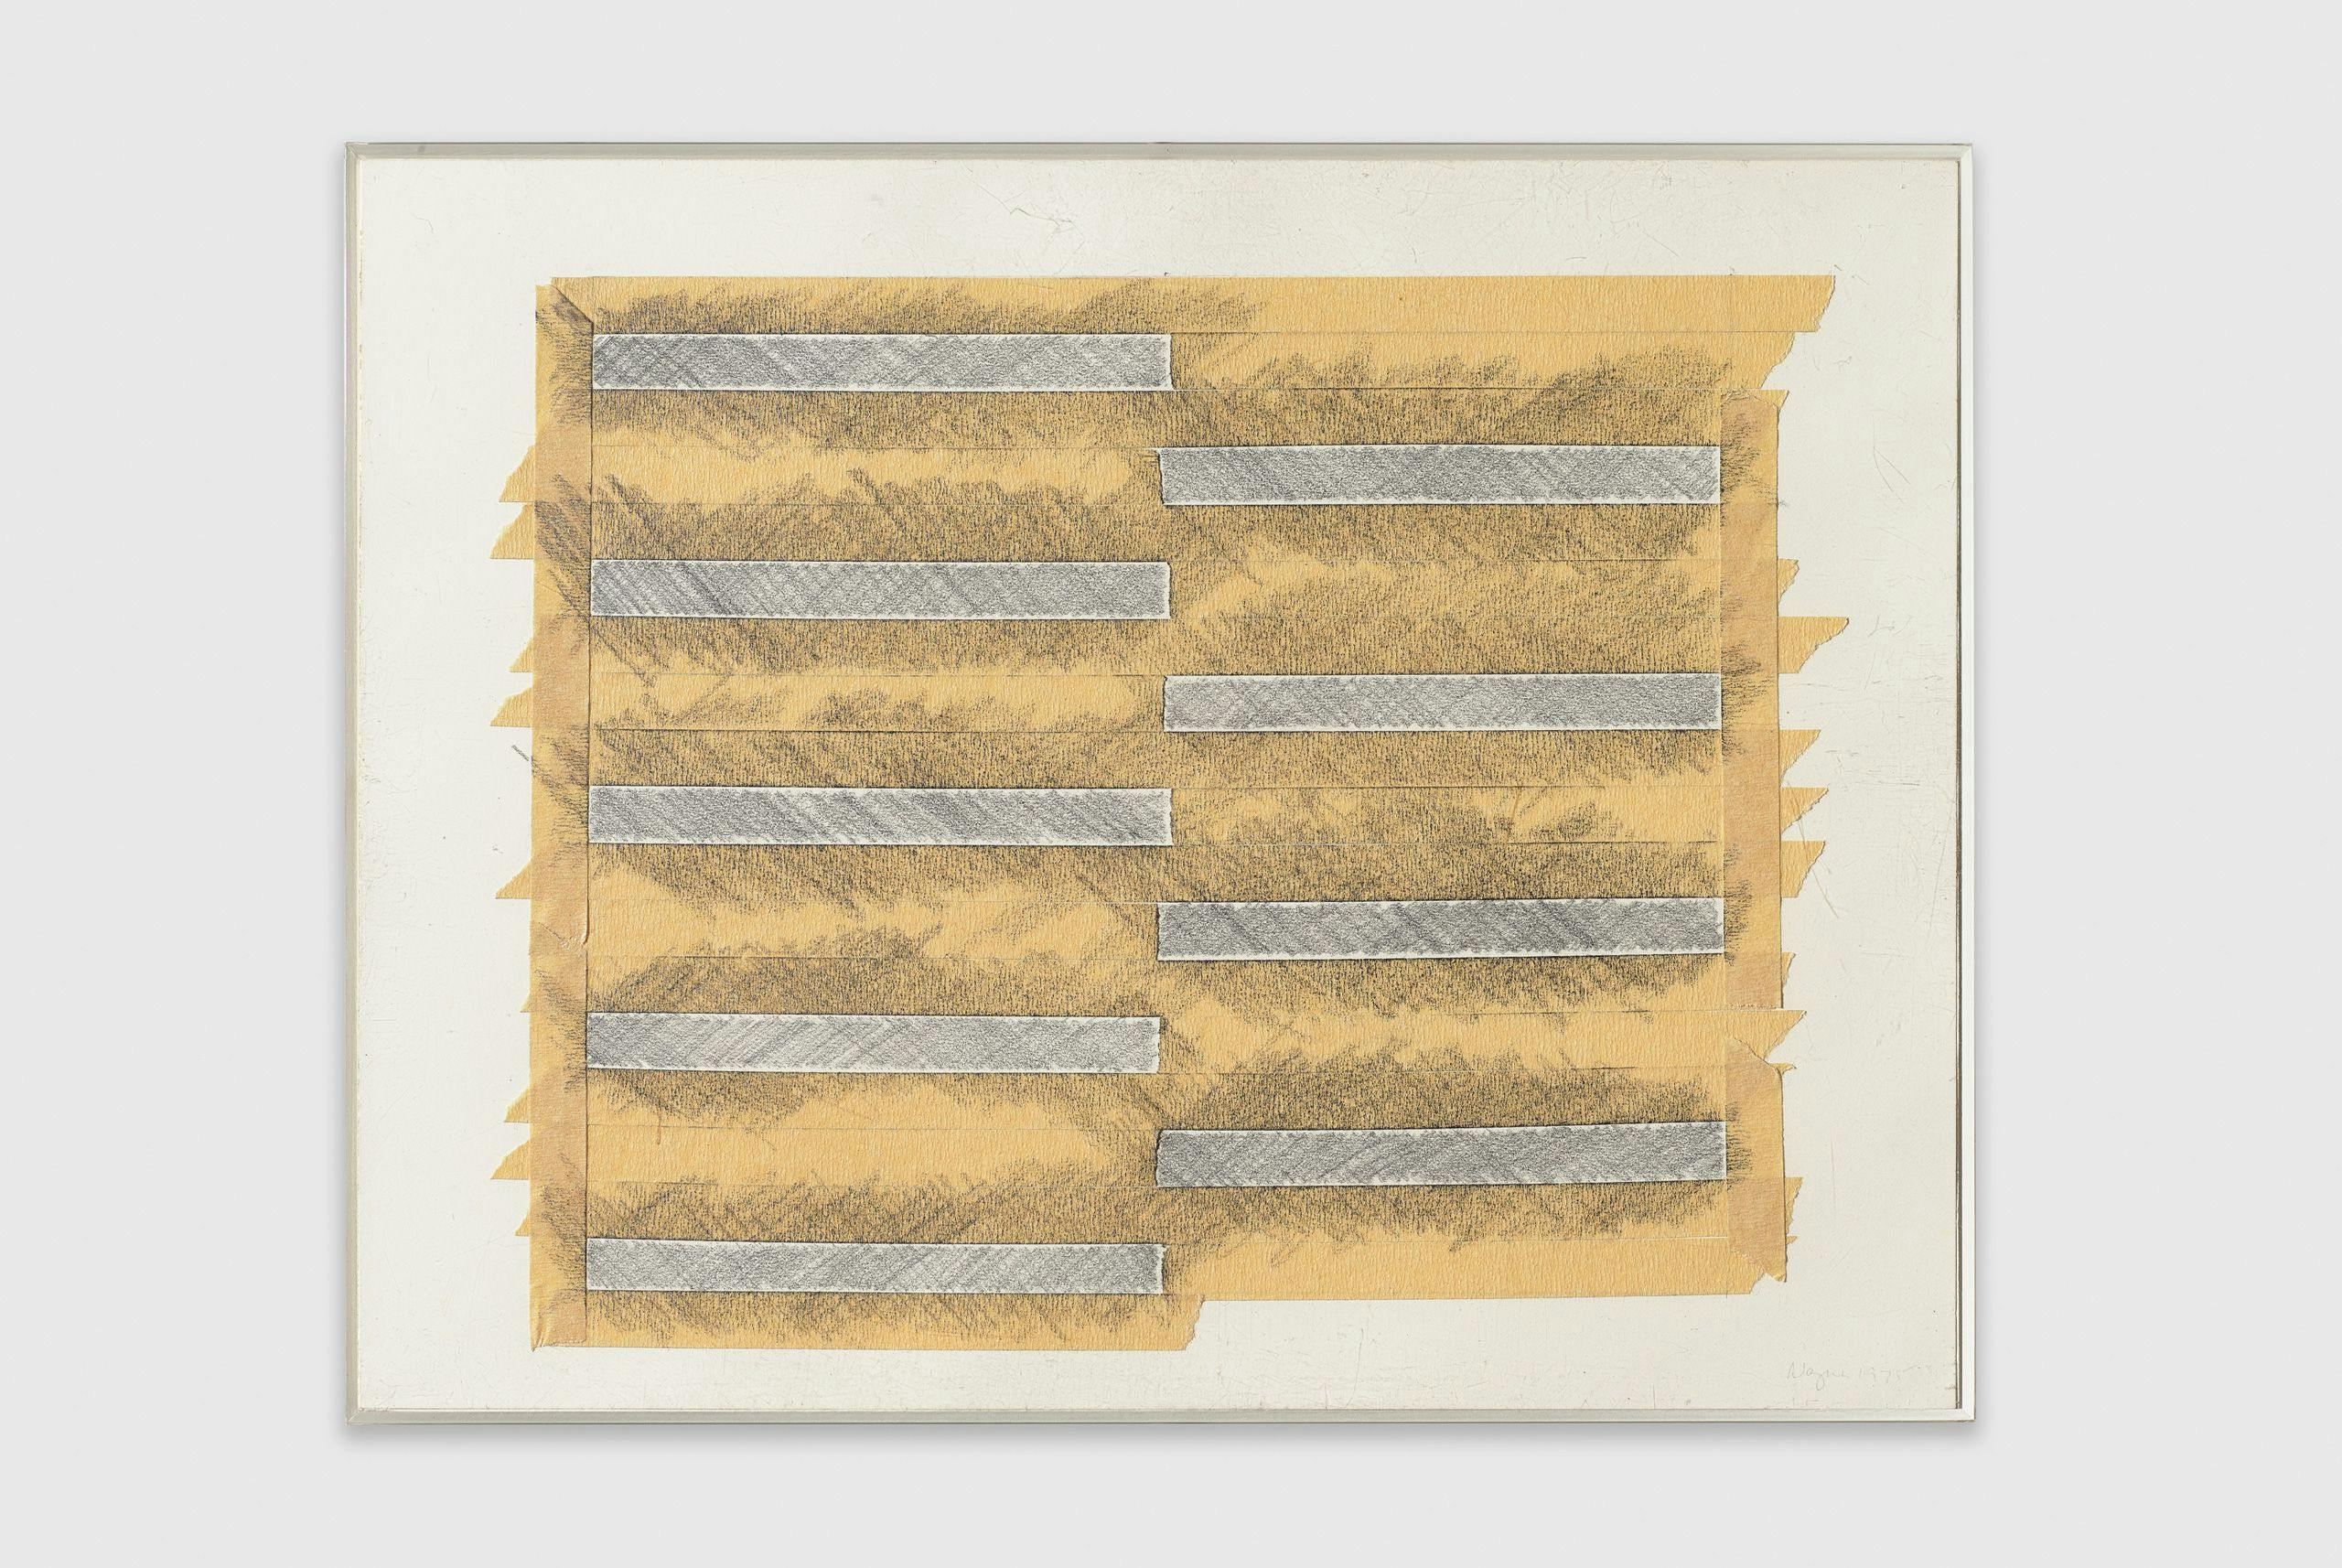 An untitled work on paper by Merrill Wagner, dated 1975